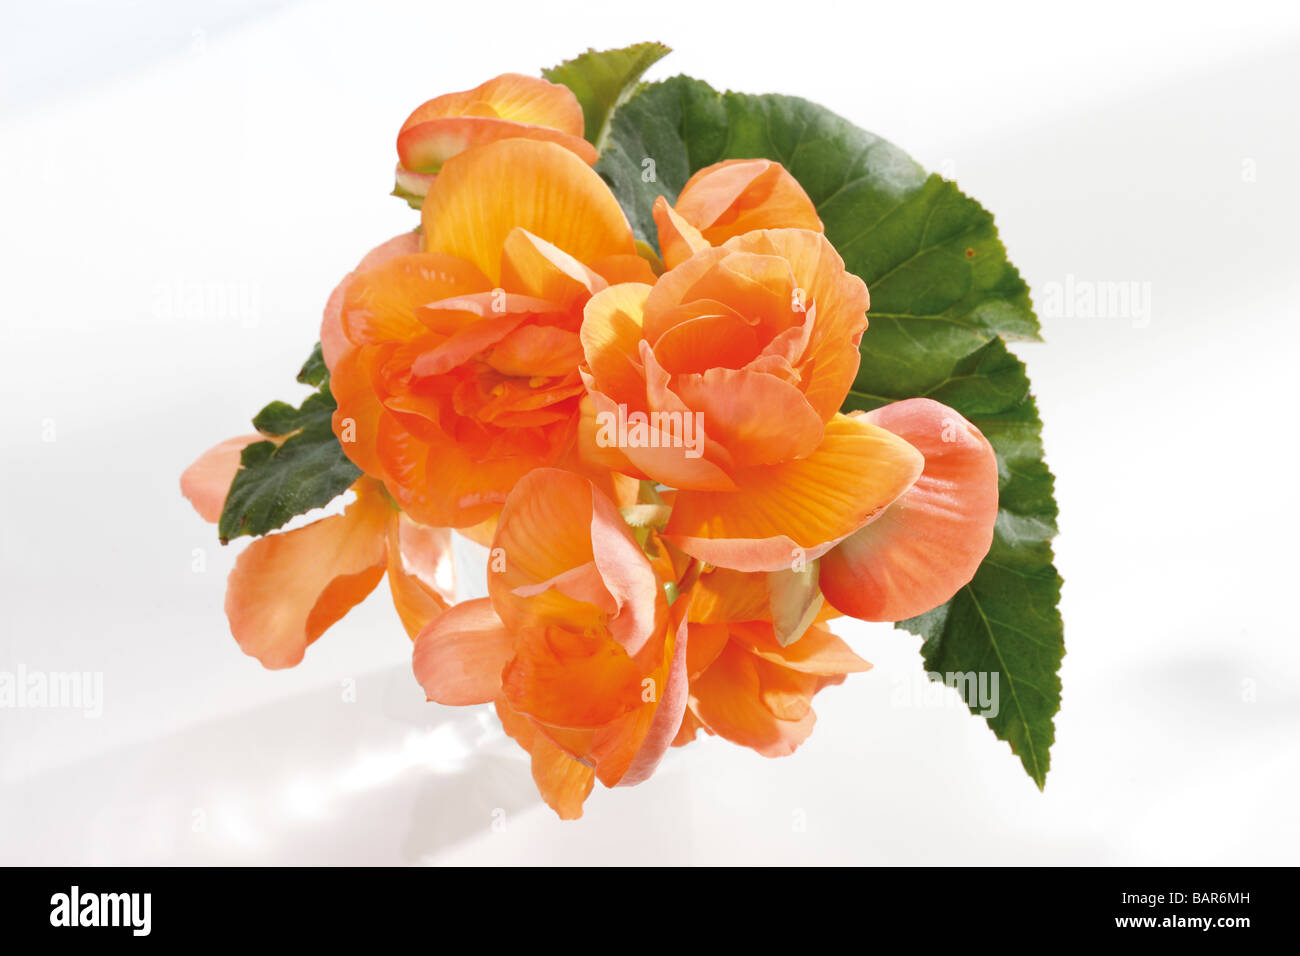 Begonia flowers (Begonia), elevated view Stock Photo